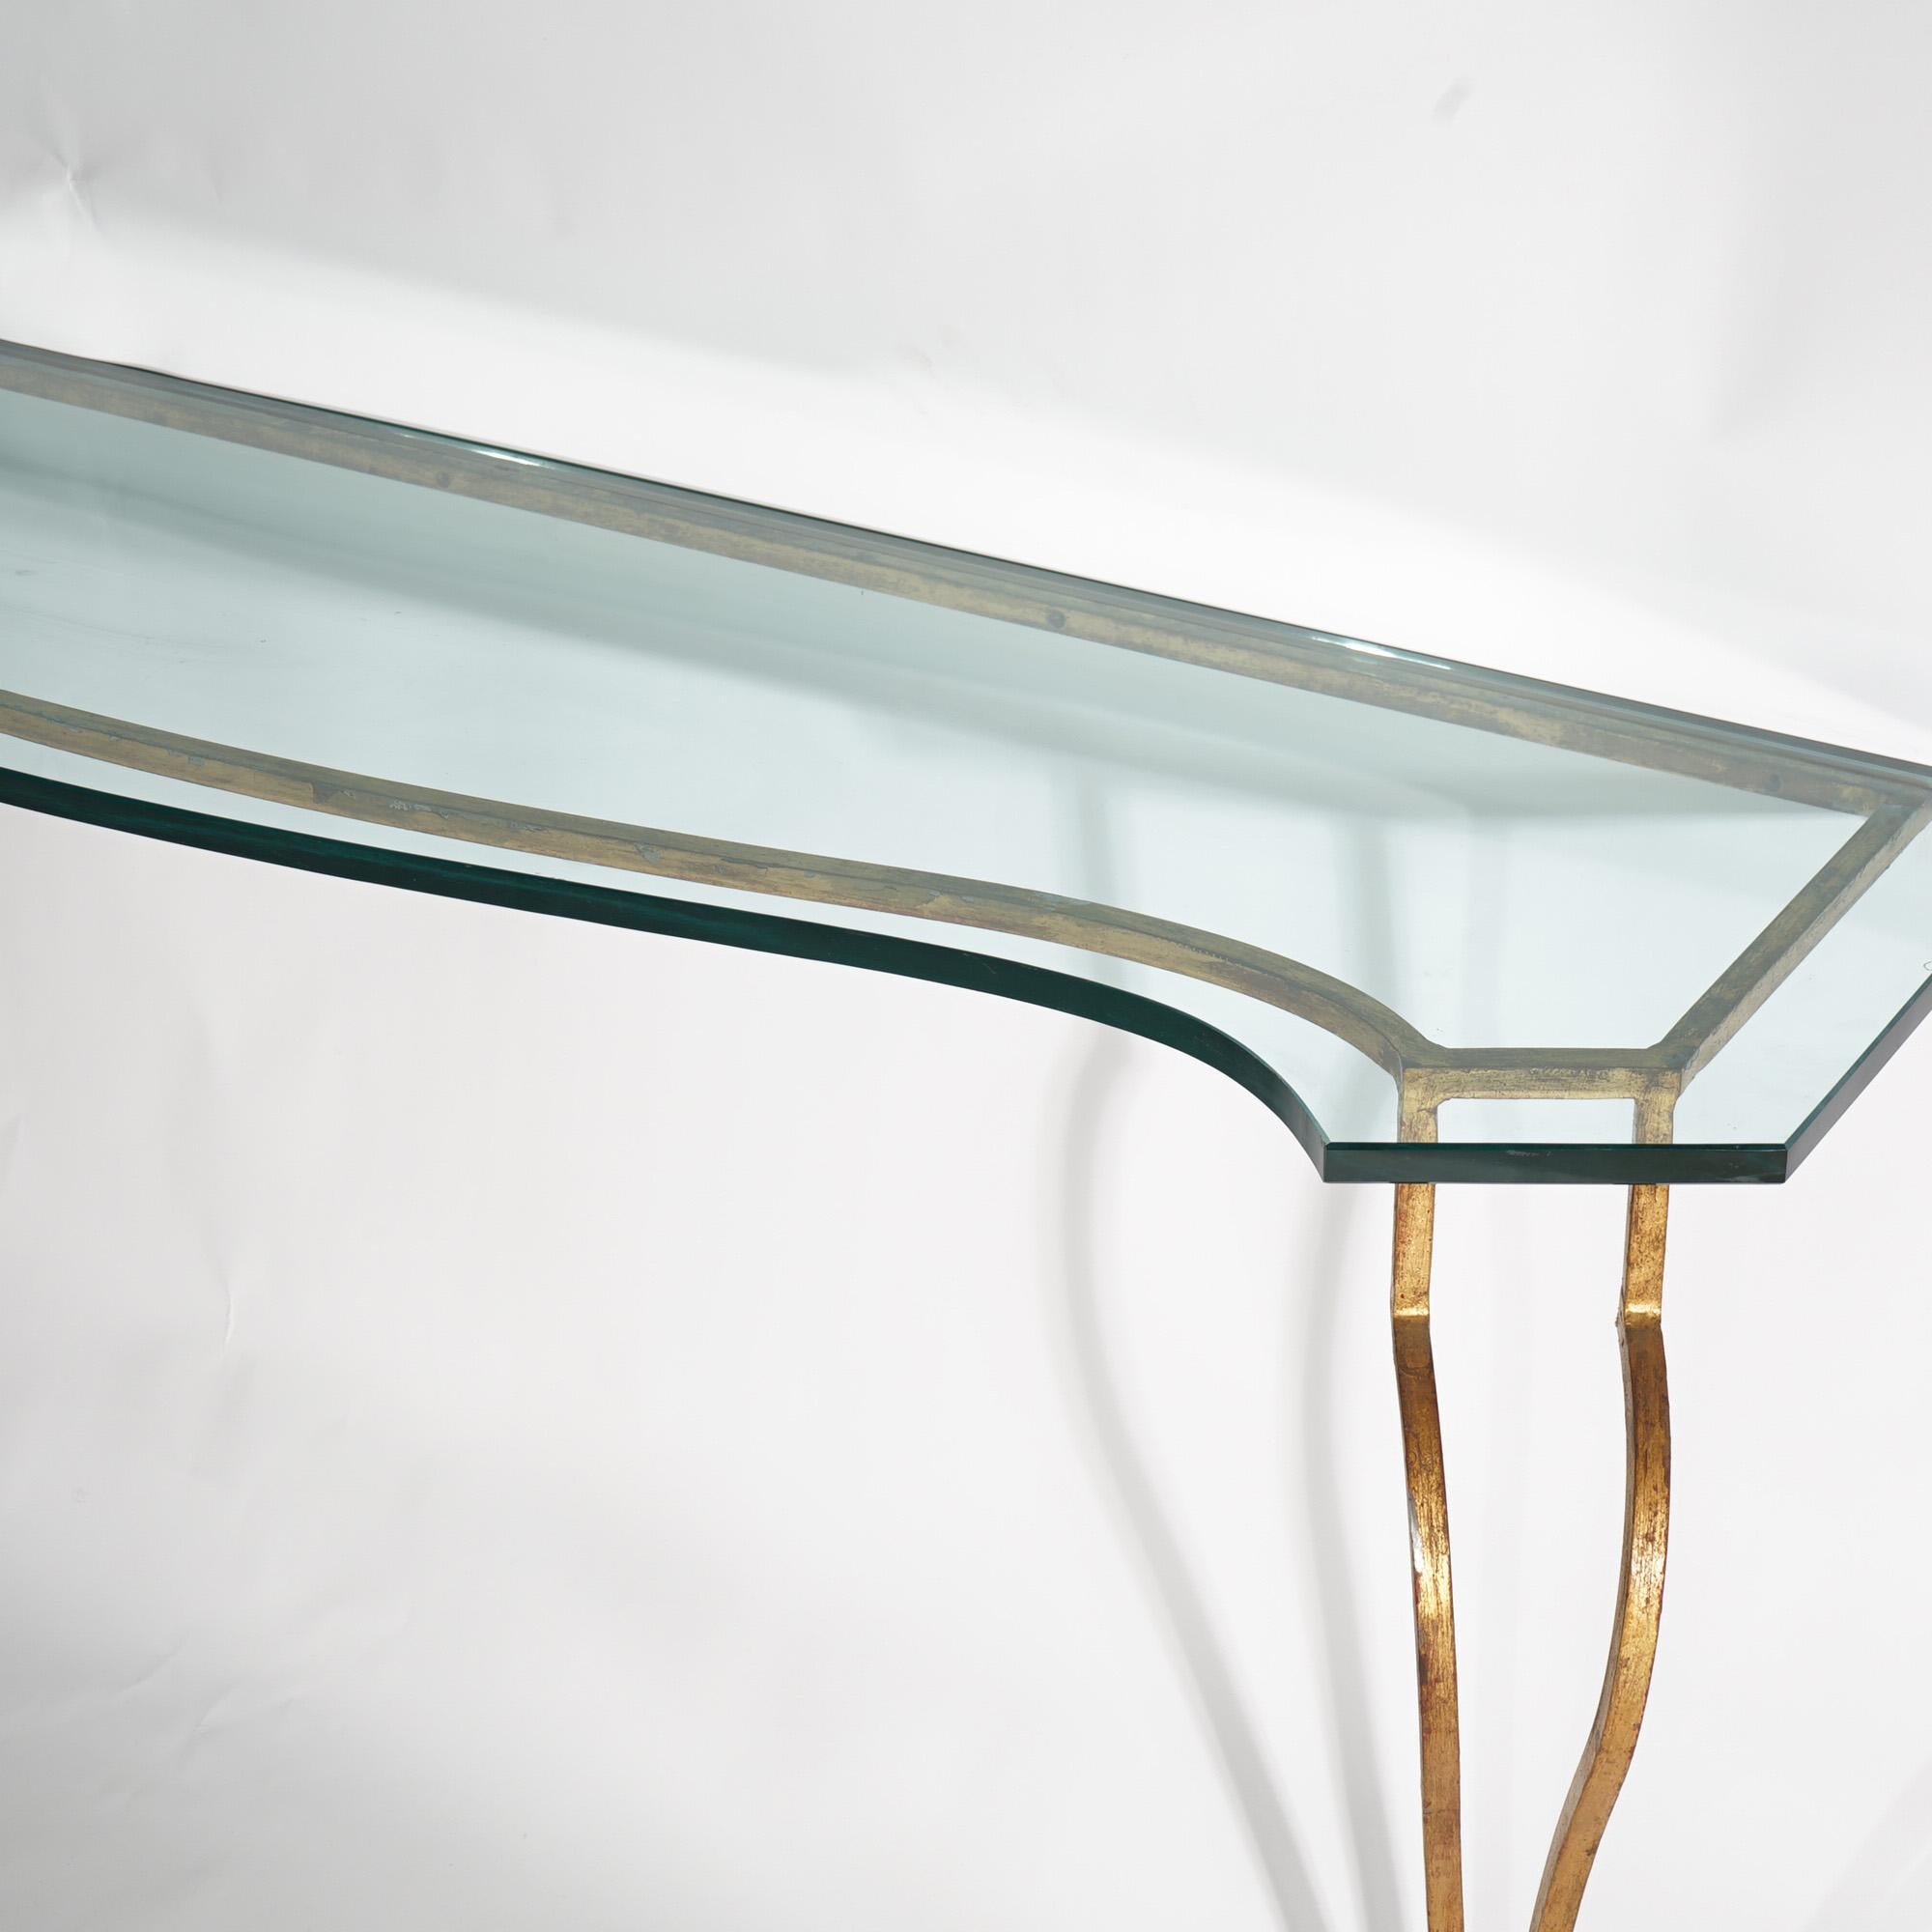 Italian Gold Gilt Wrought Iron Console Table with Glass Top 20th C For Sale 3